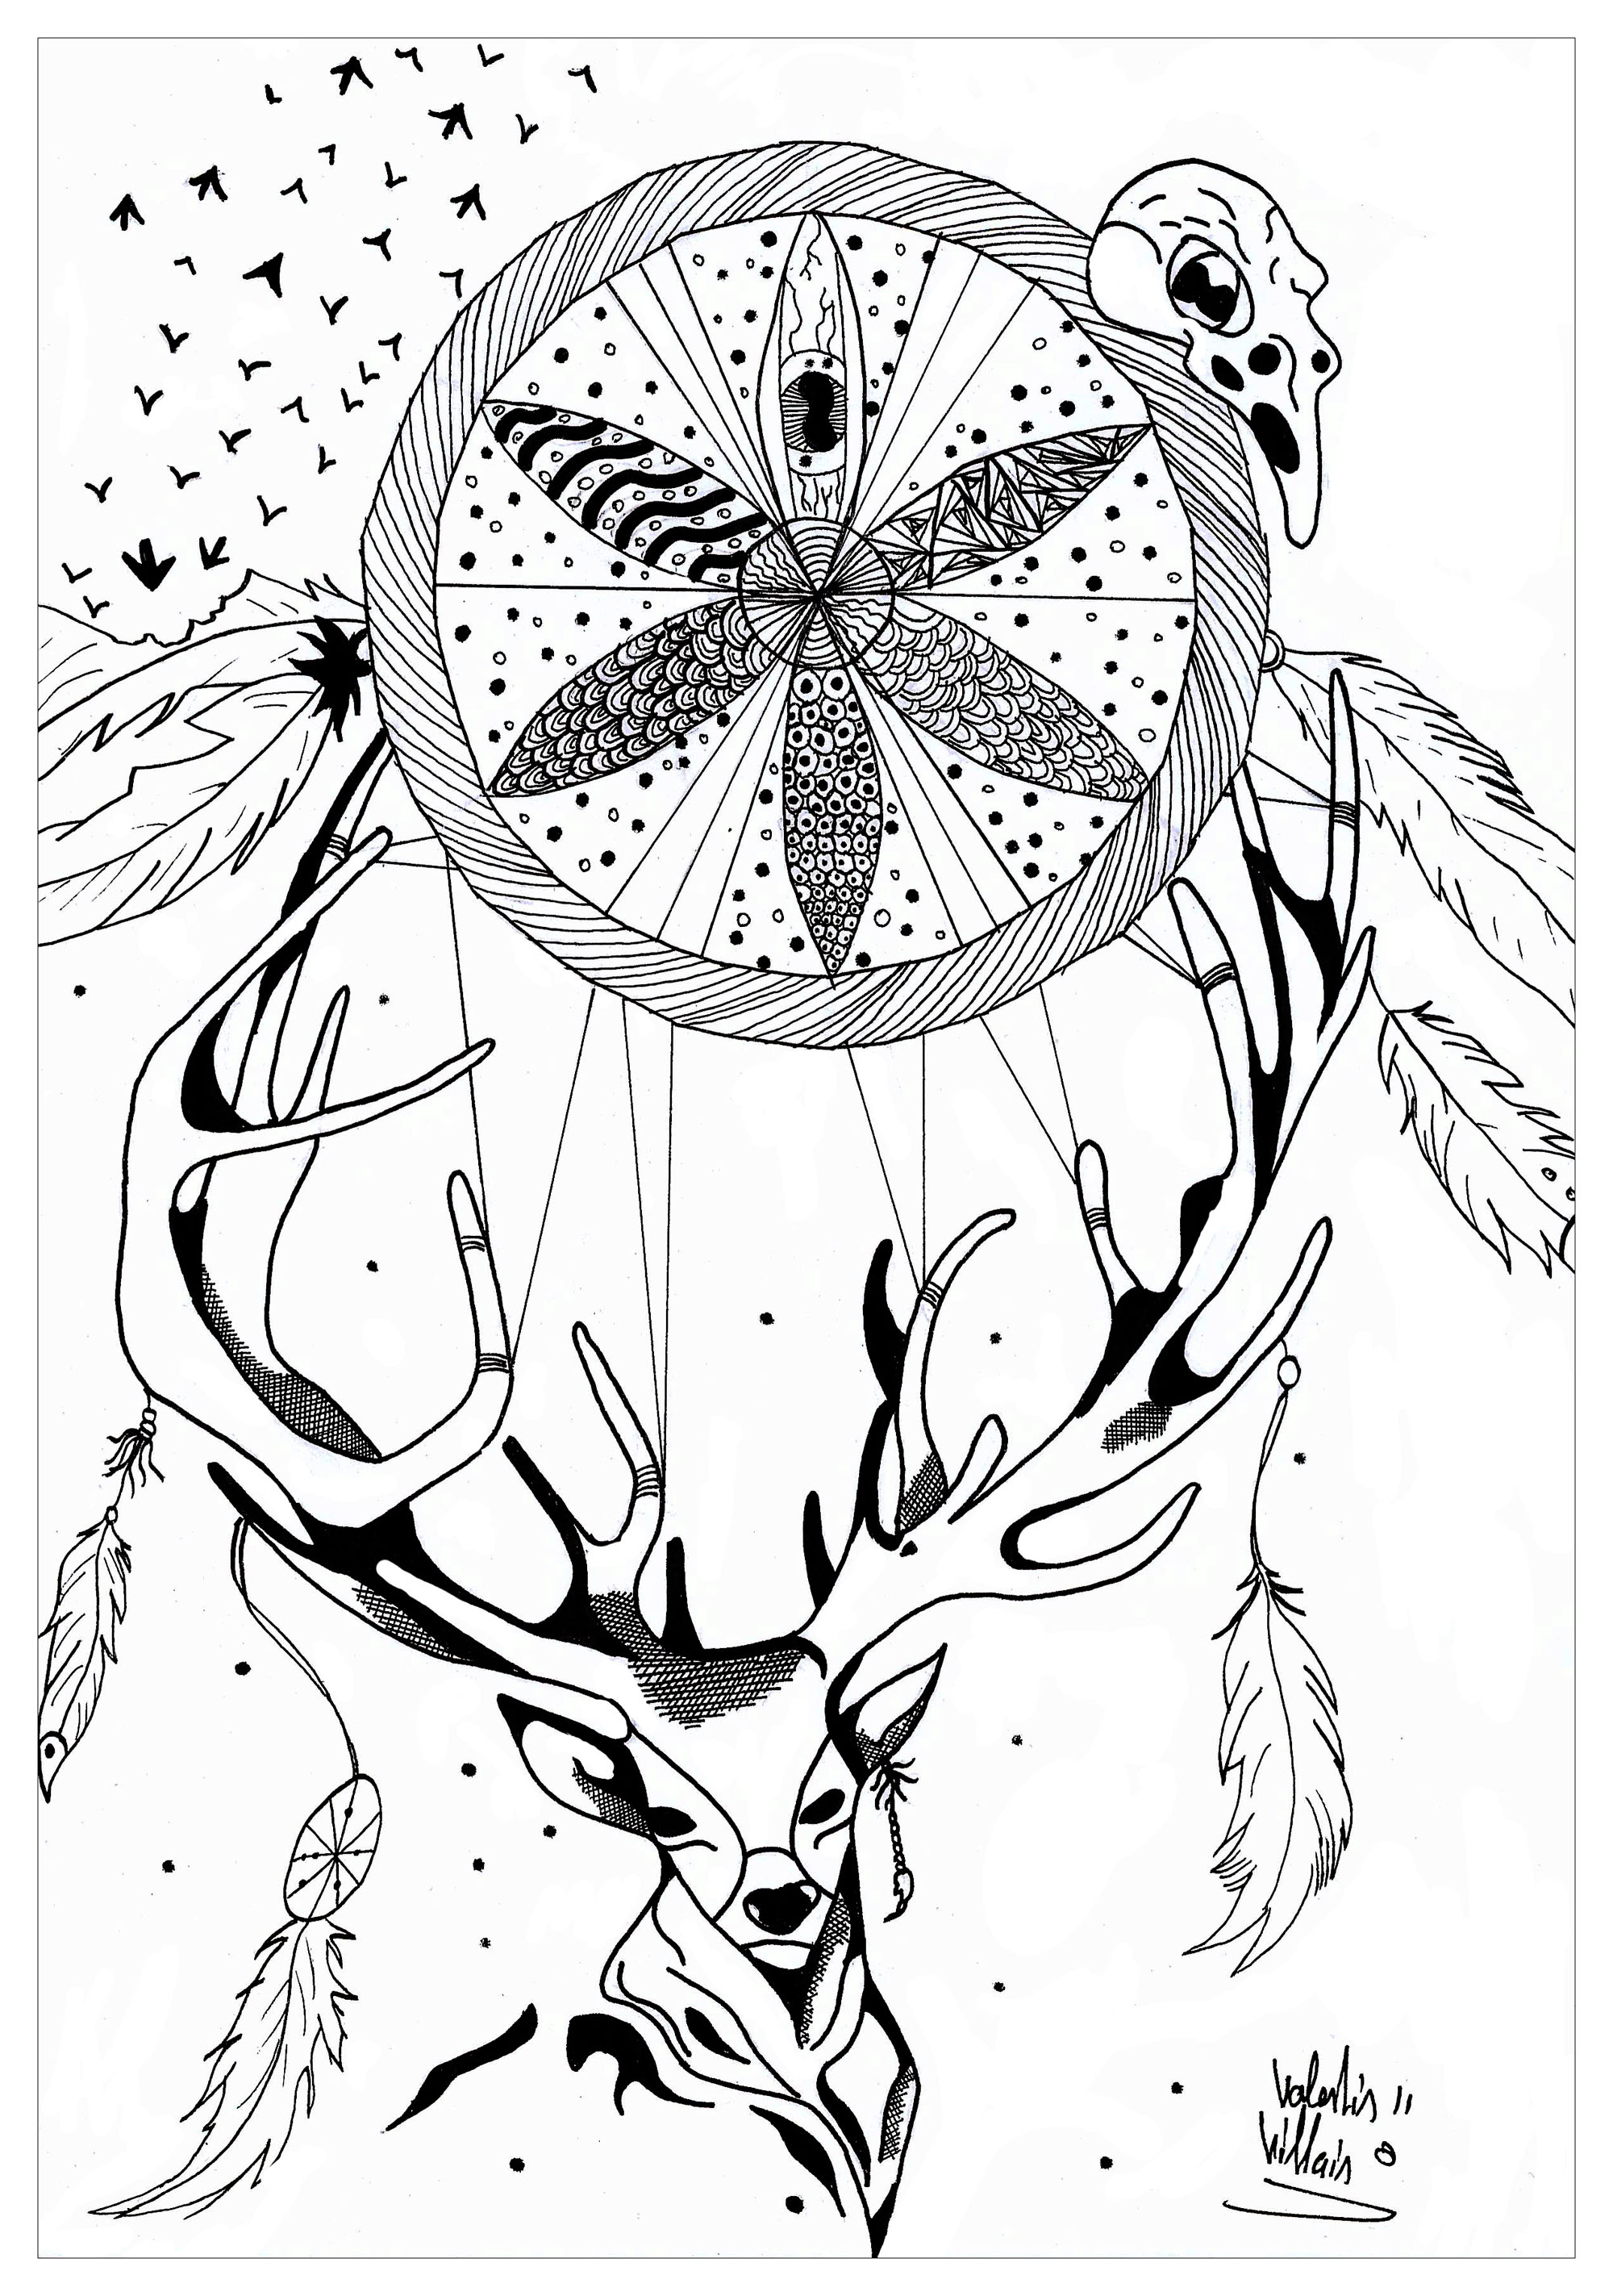 Coloring page of a deer with a dreamcatcher. This original drawing represents a deer with beautiful antlers, supporting an incredible dreamcatcher, Artist : Valentin